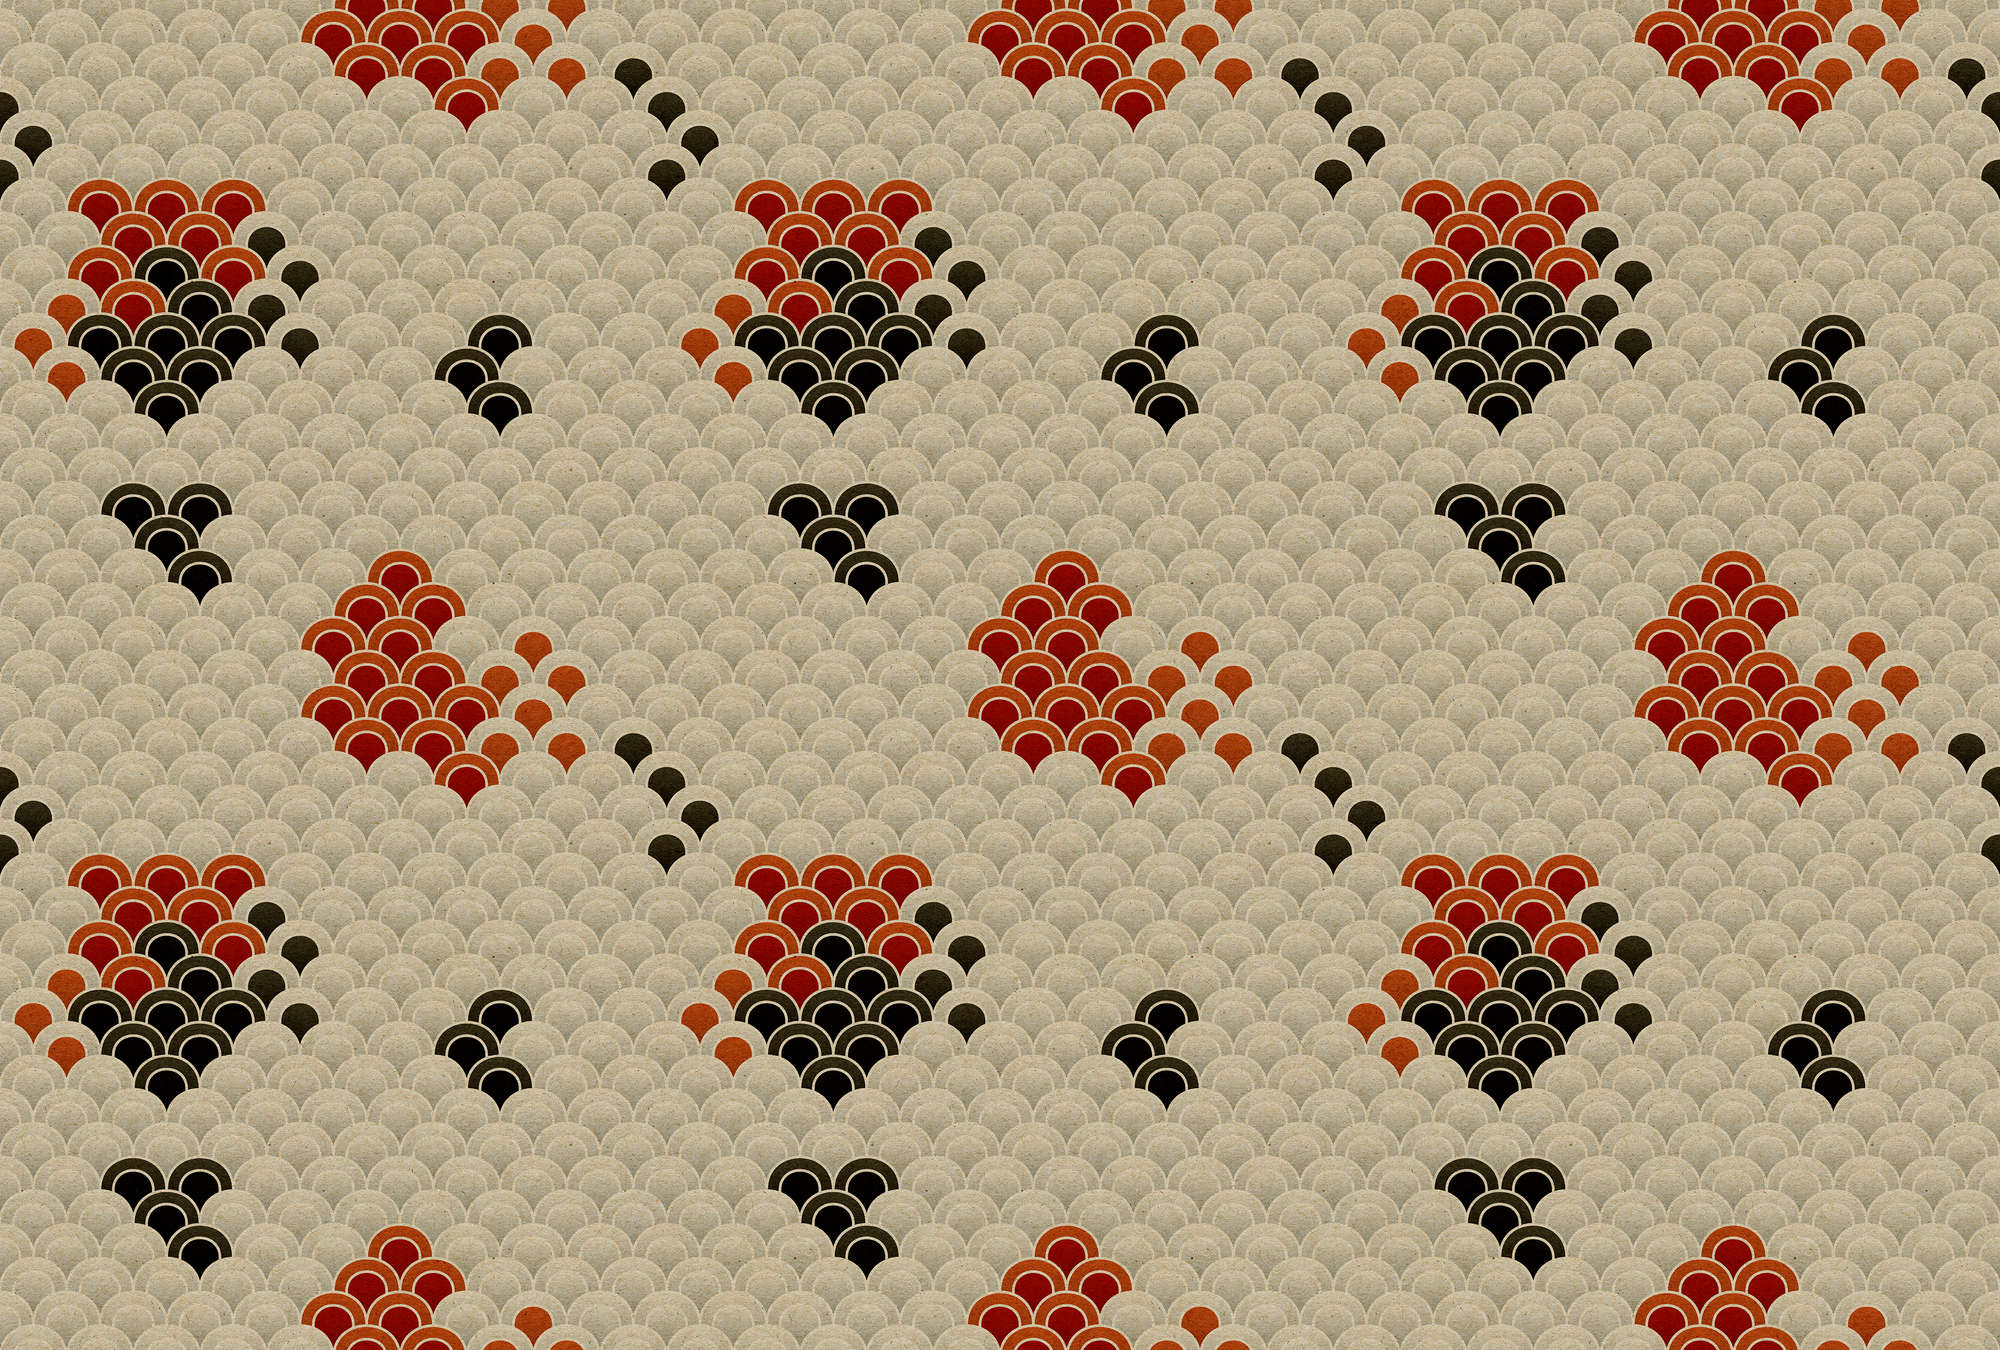             Koi 2 - Koi Digital Print on Cardboard Structure, Abstract & Stylised - Beige, Red | Matt Smooth Non-woven
        